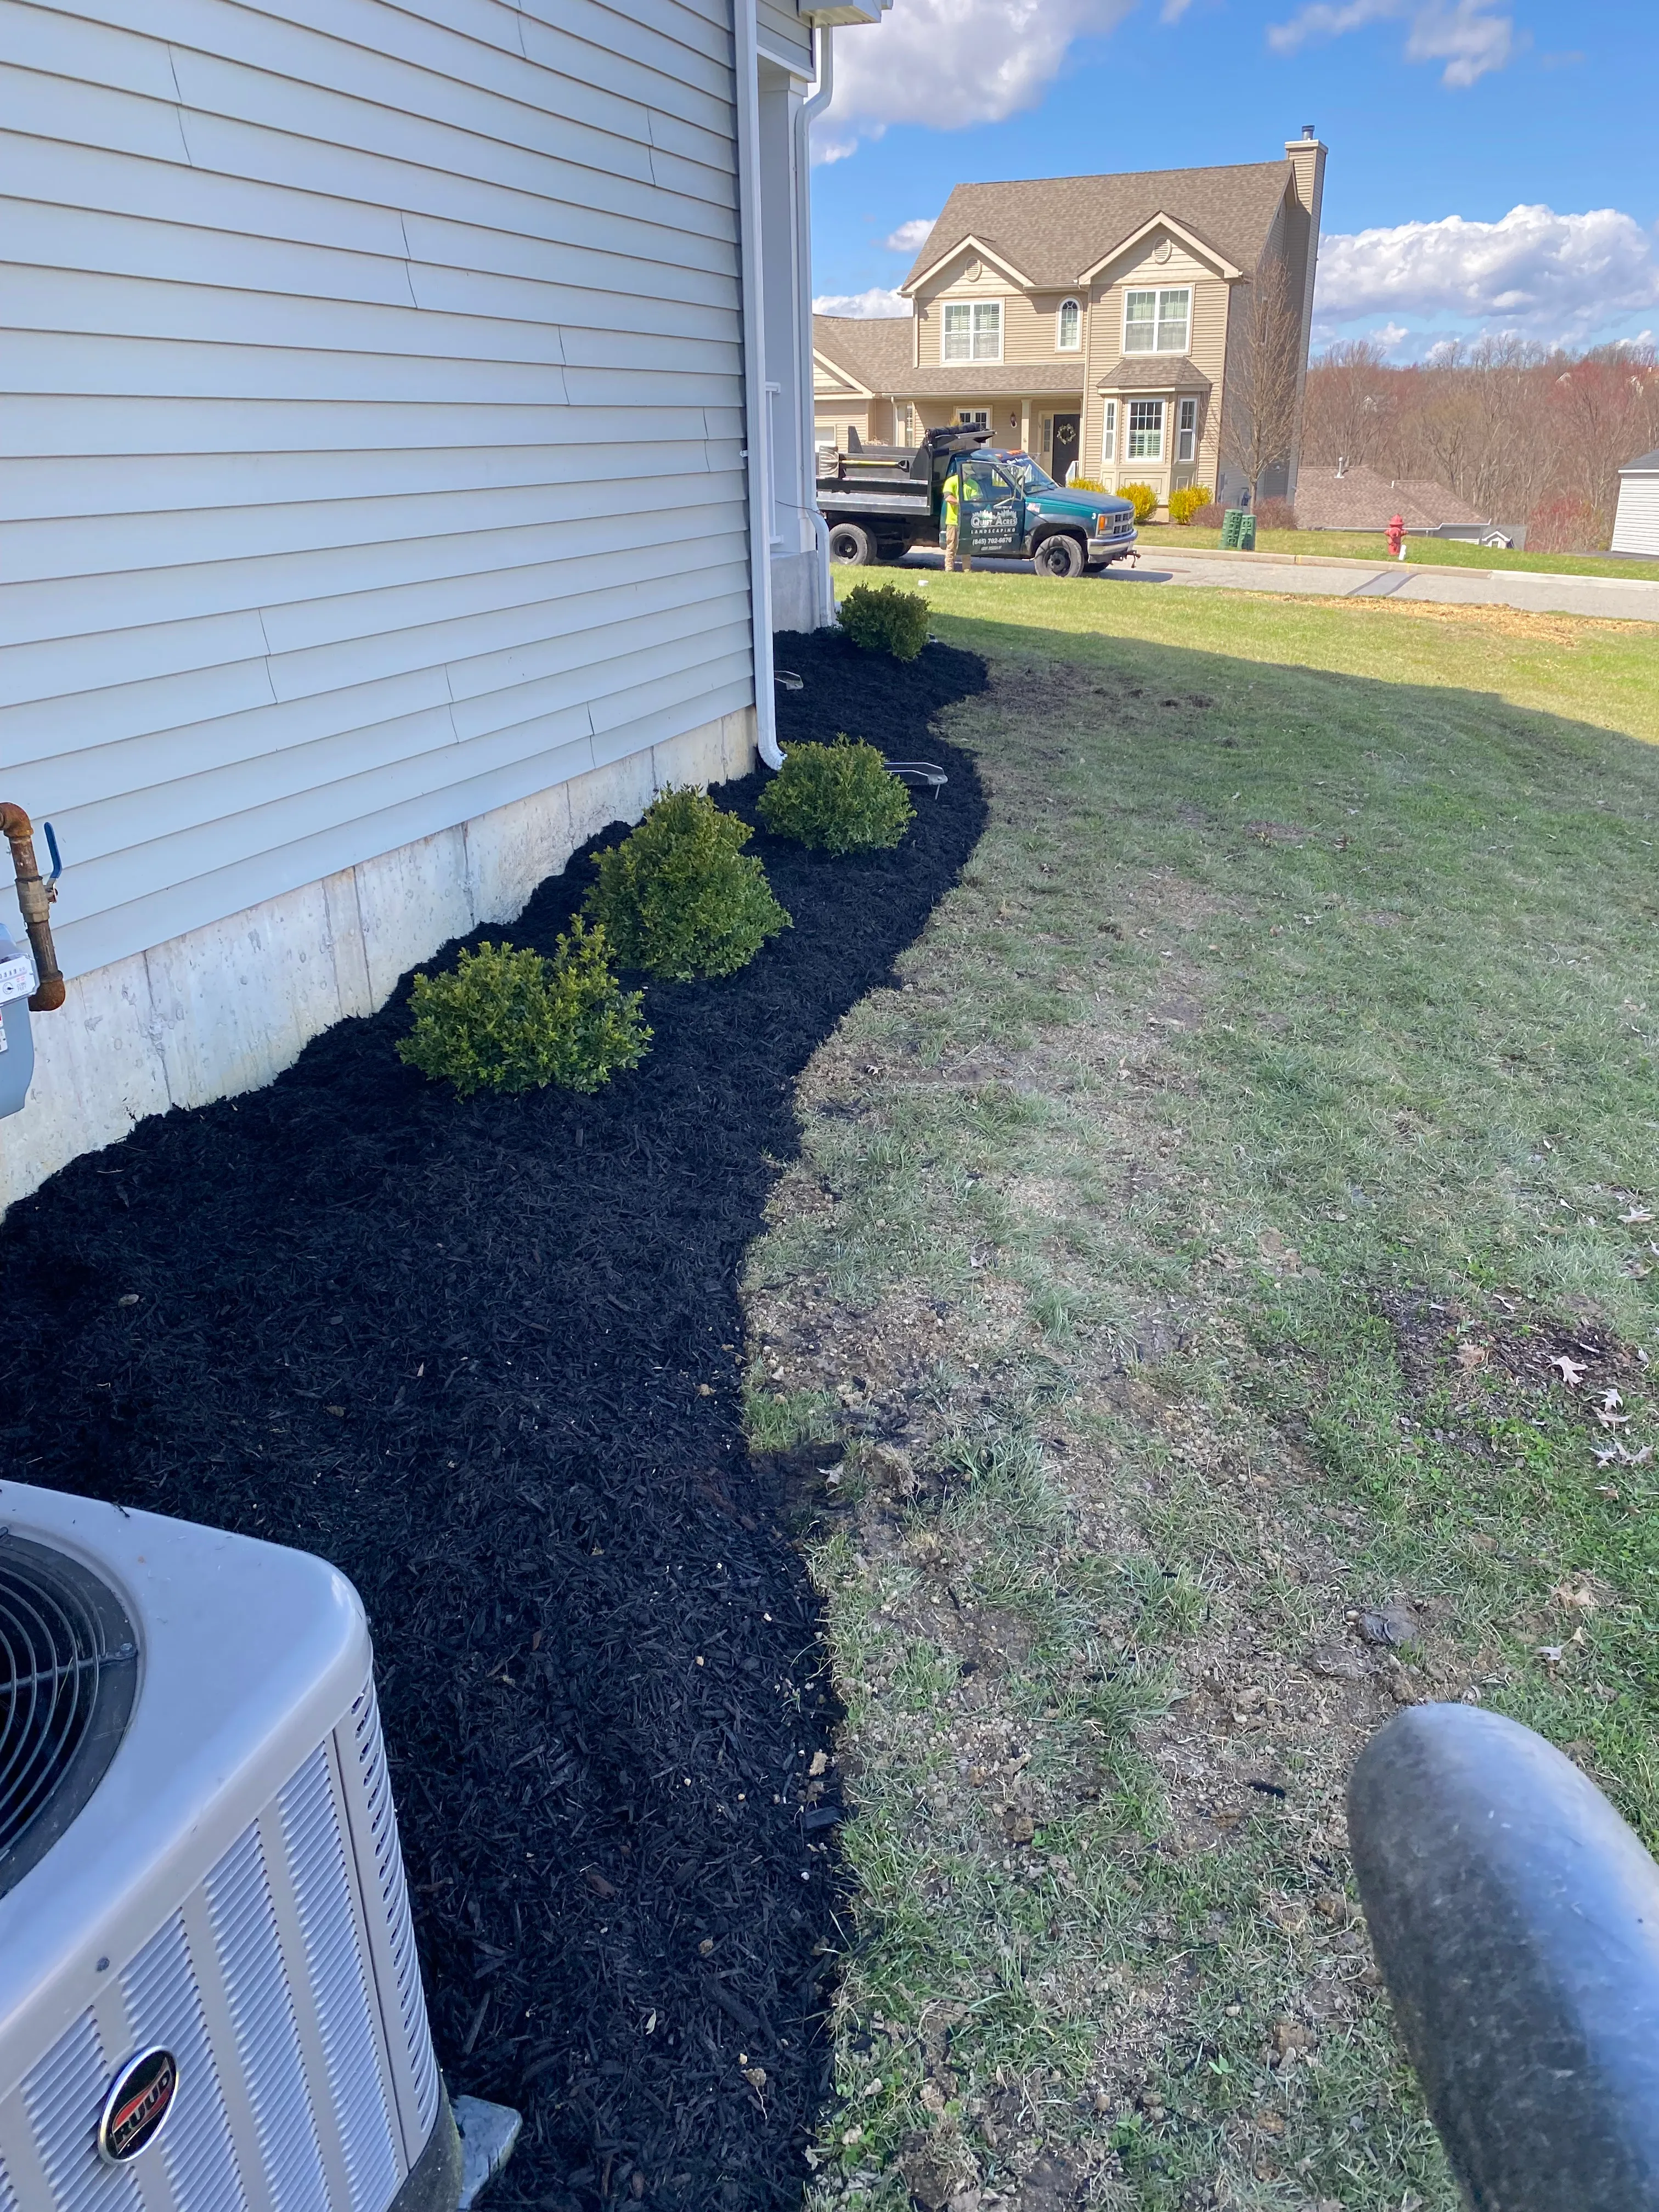 Commercial Services for Quiet Acres Landscaping in Dutchess County, NY